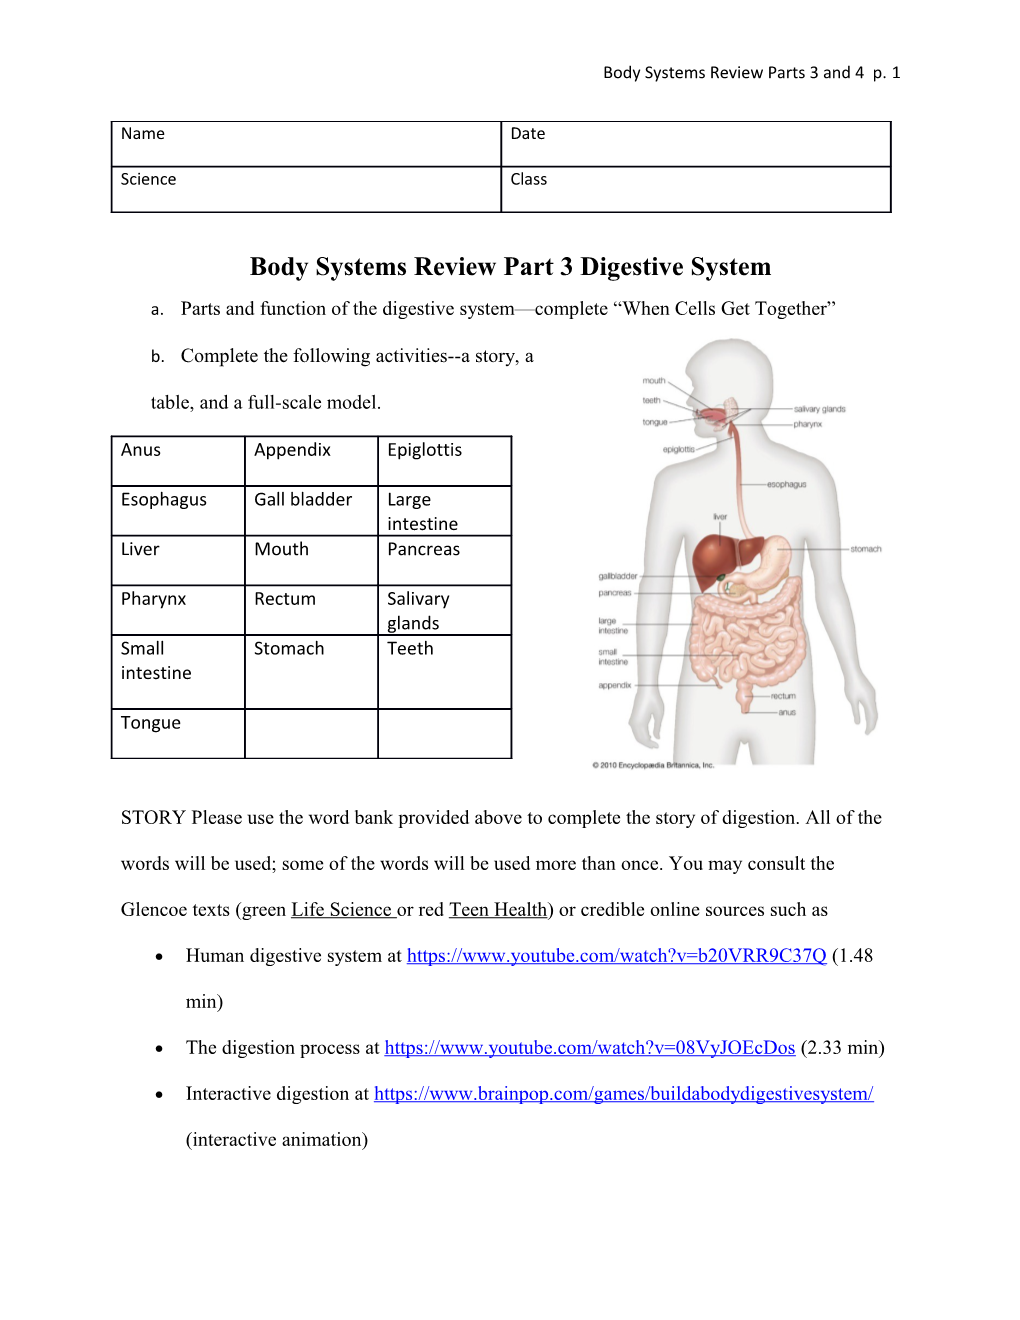 Body Systems Review Part 3 Digestive System